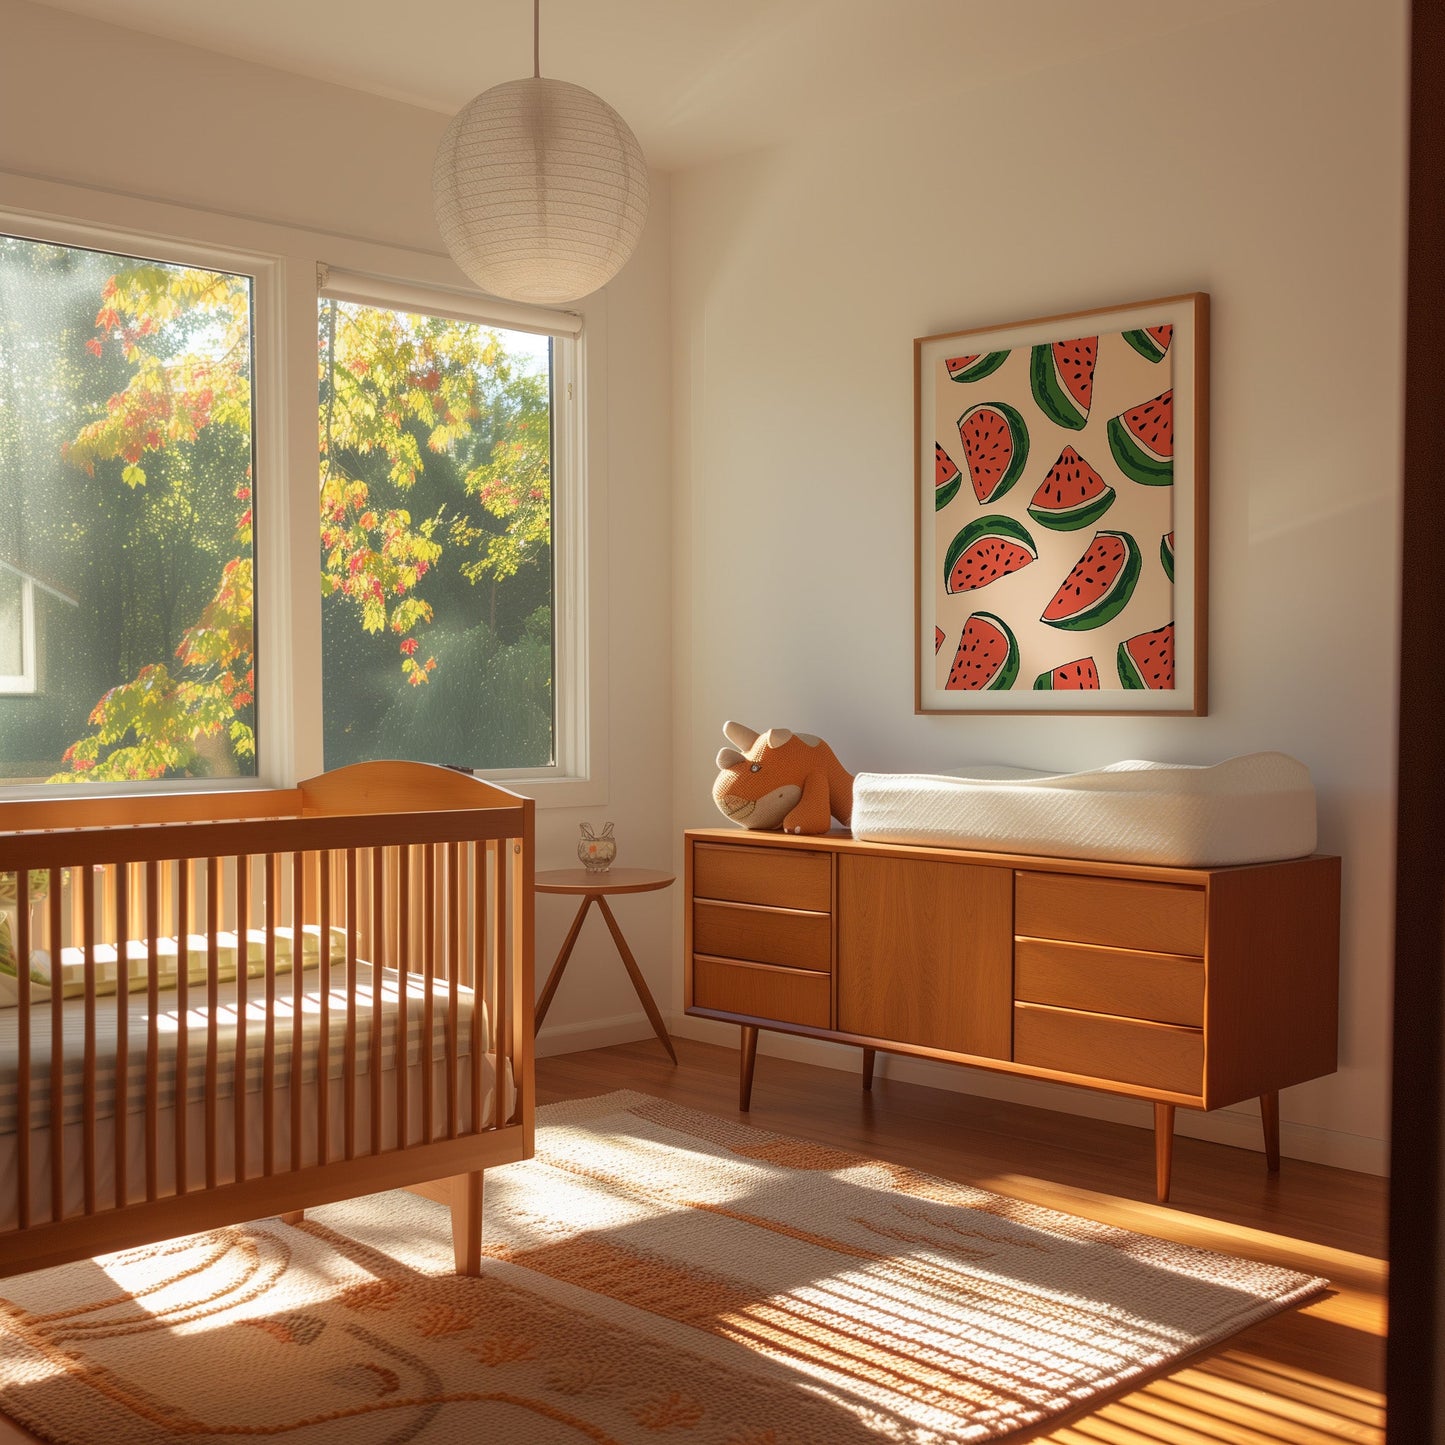 A sunny nursery room with a crib, dresser, and colorful fruit artwork on the wall.